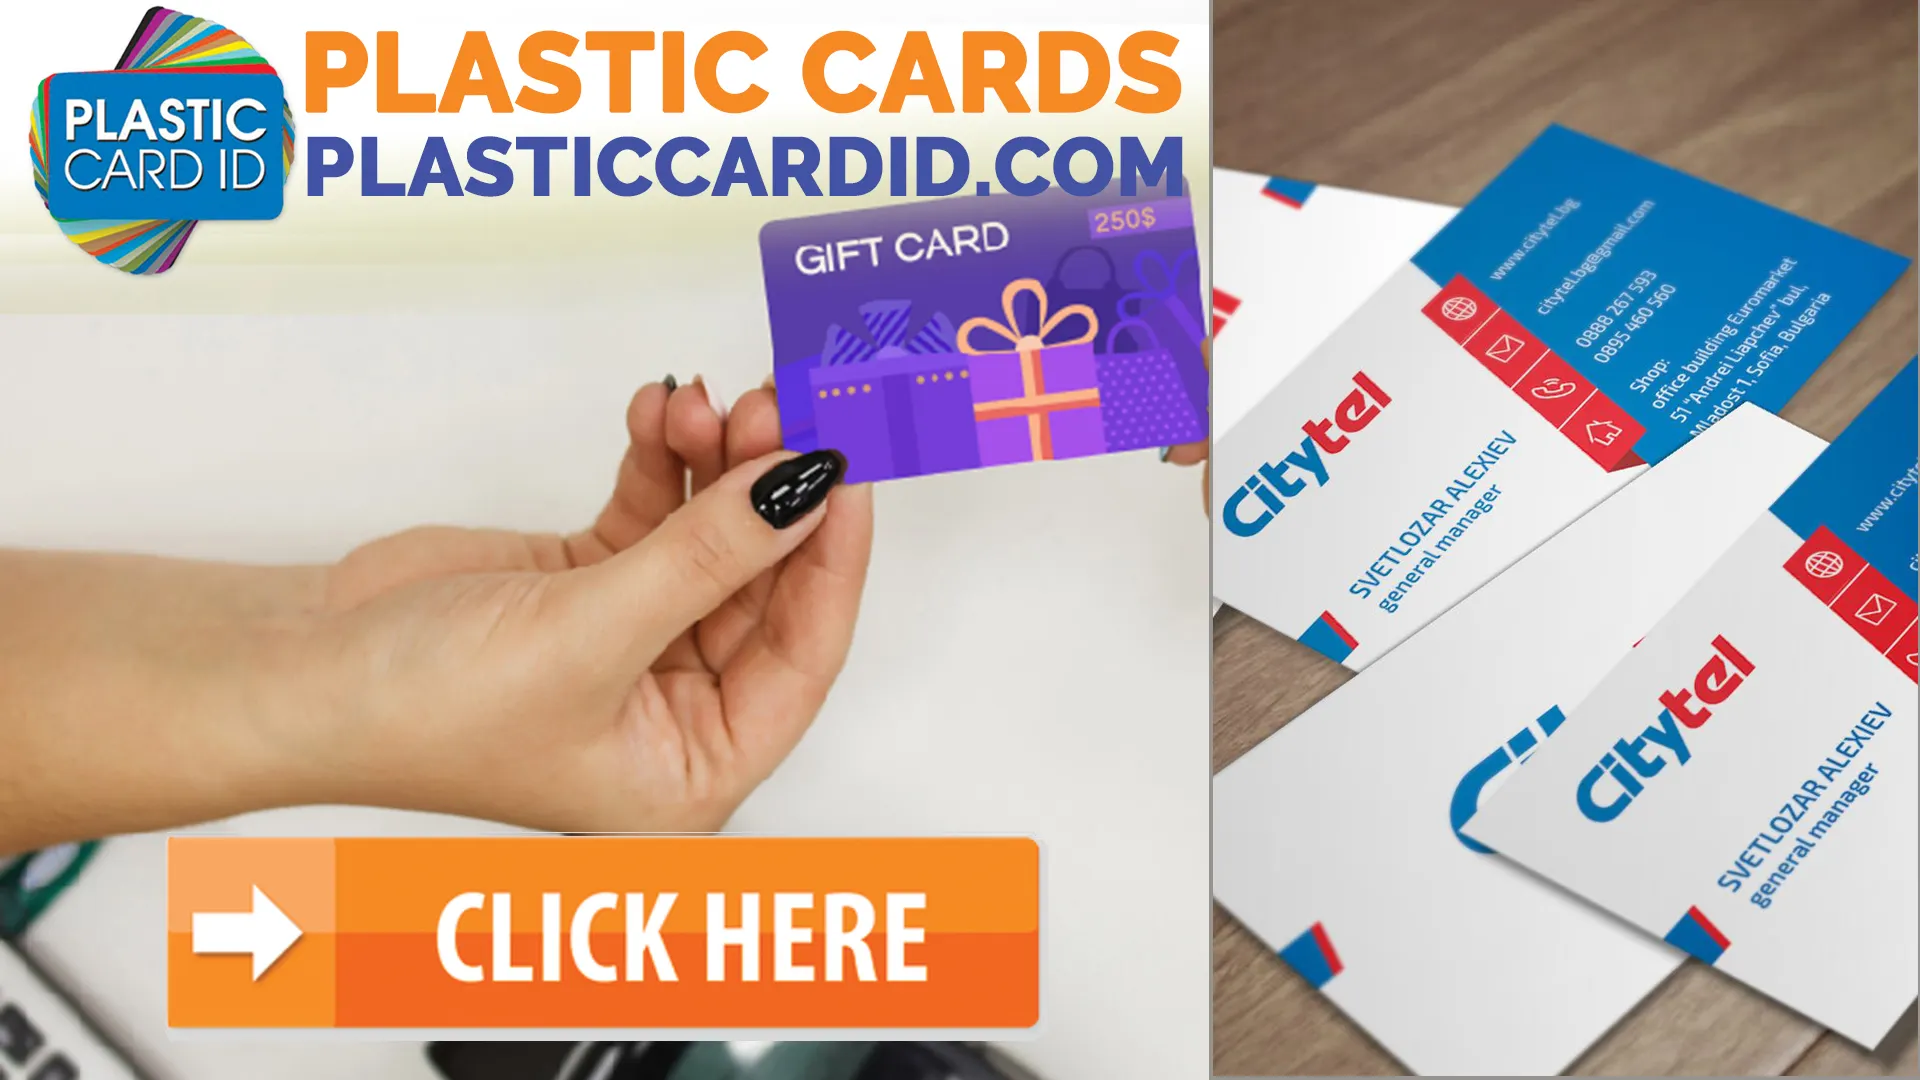 Your One-Stop Shop for Plastic Card Accessories